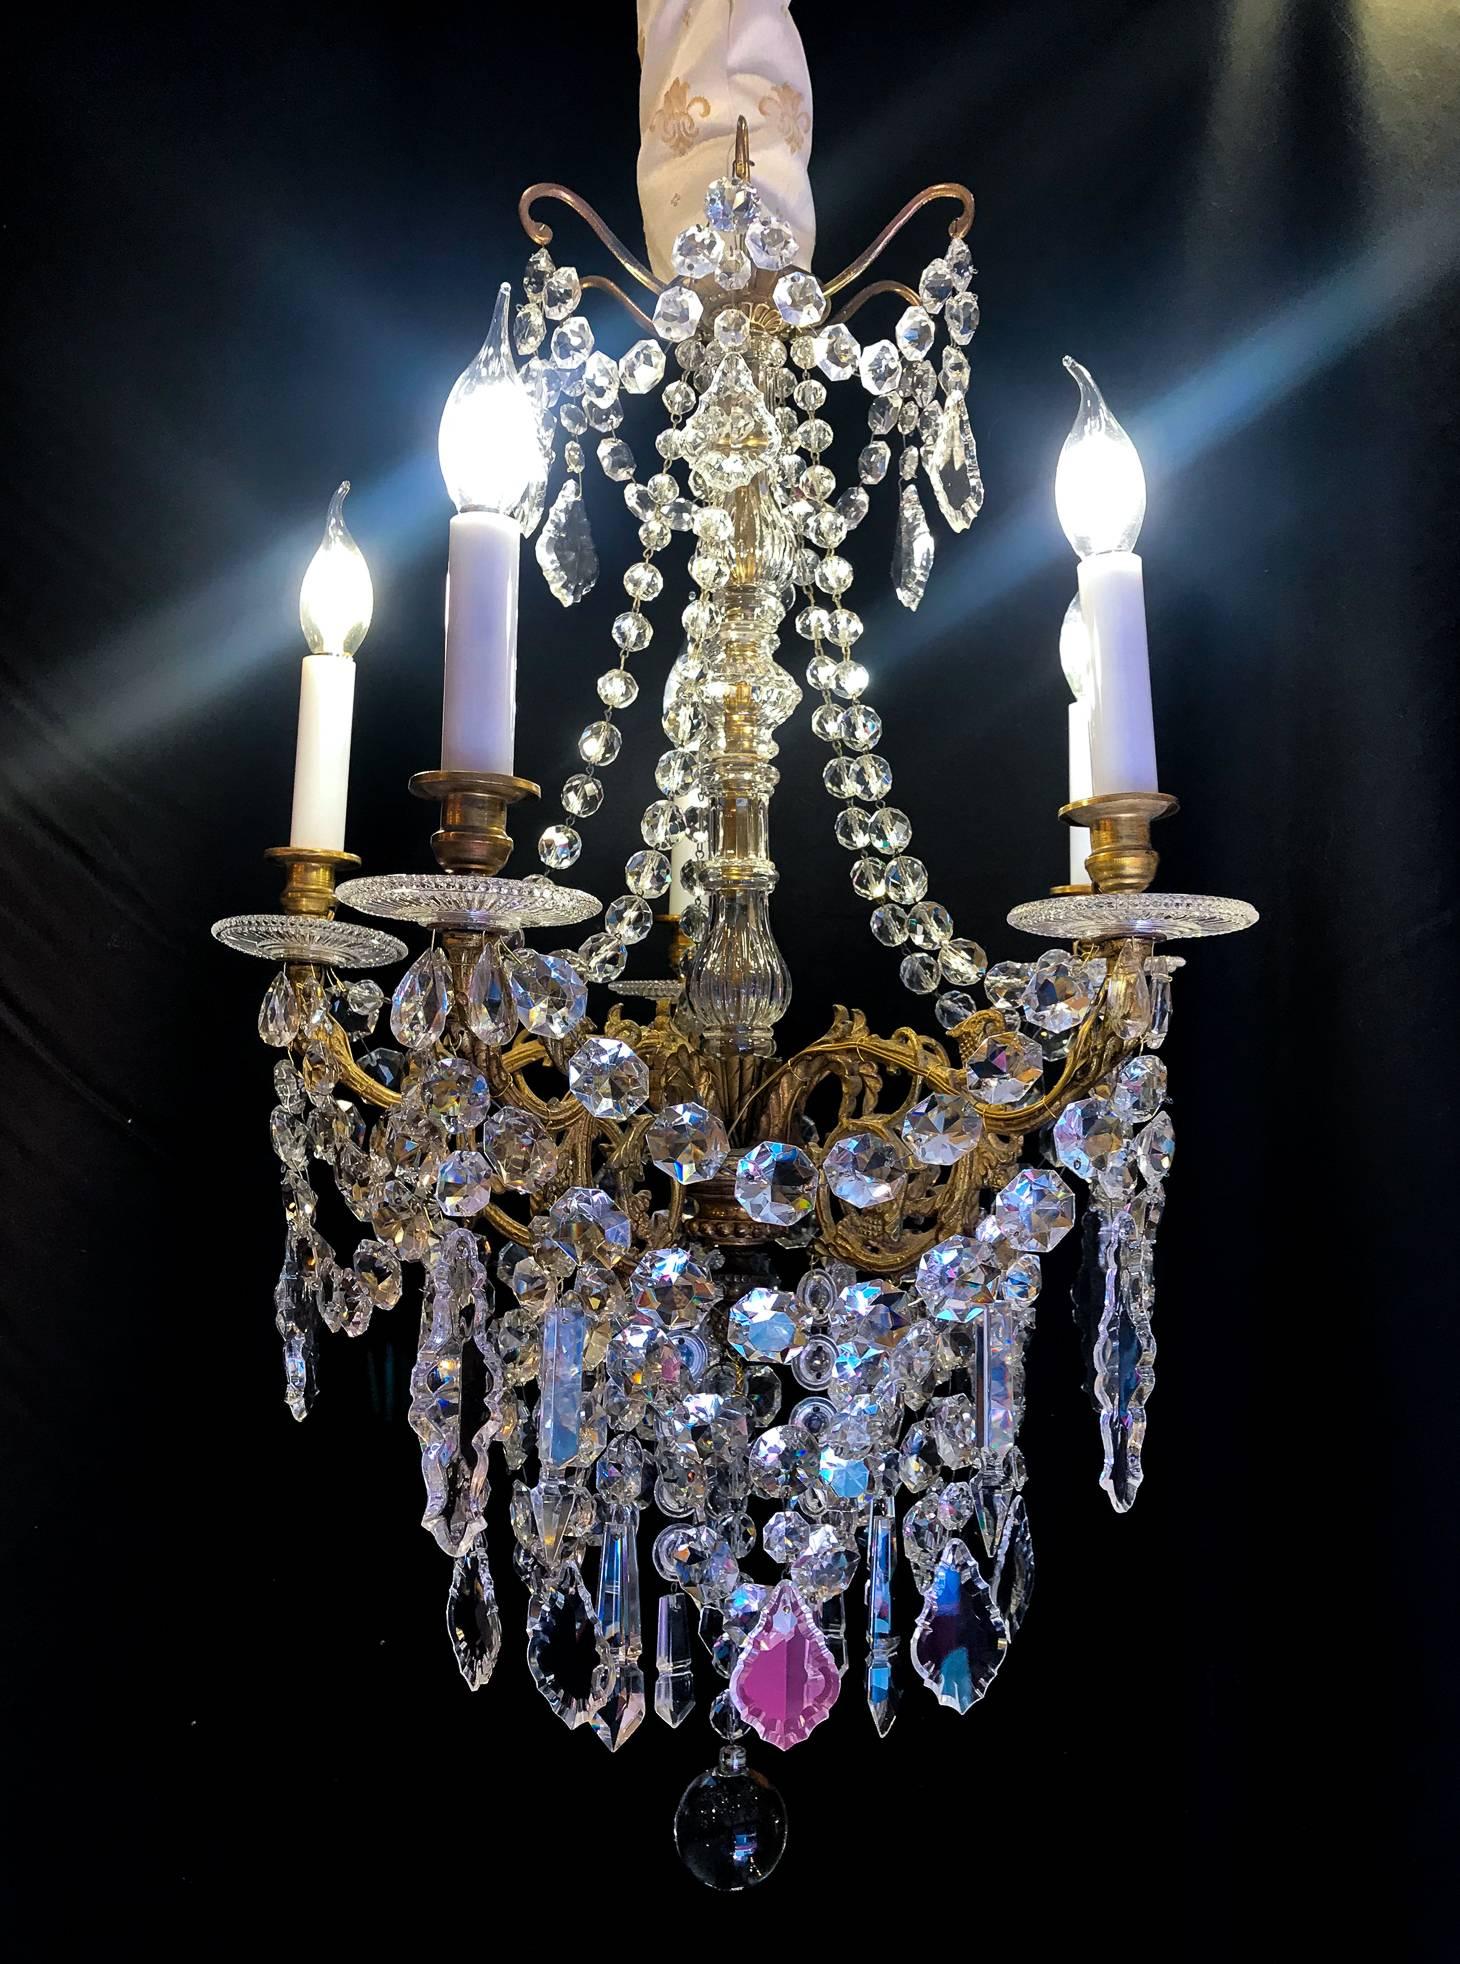 We are pleased to present you a nicely ormolu and white hand-cut crystal, form “tige” chandelier in the classic Louis XVI style. Our chandelier is composed of five arm-lights. Original gilt-bronze, finely chiseled.
Beautiful quality hand-cut